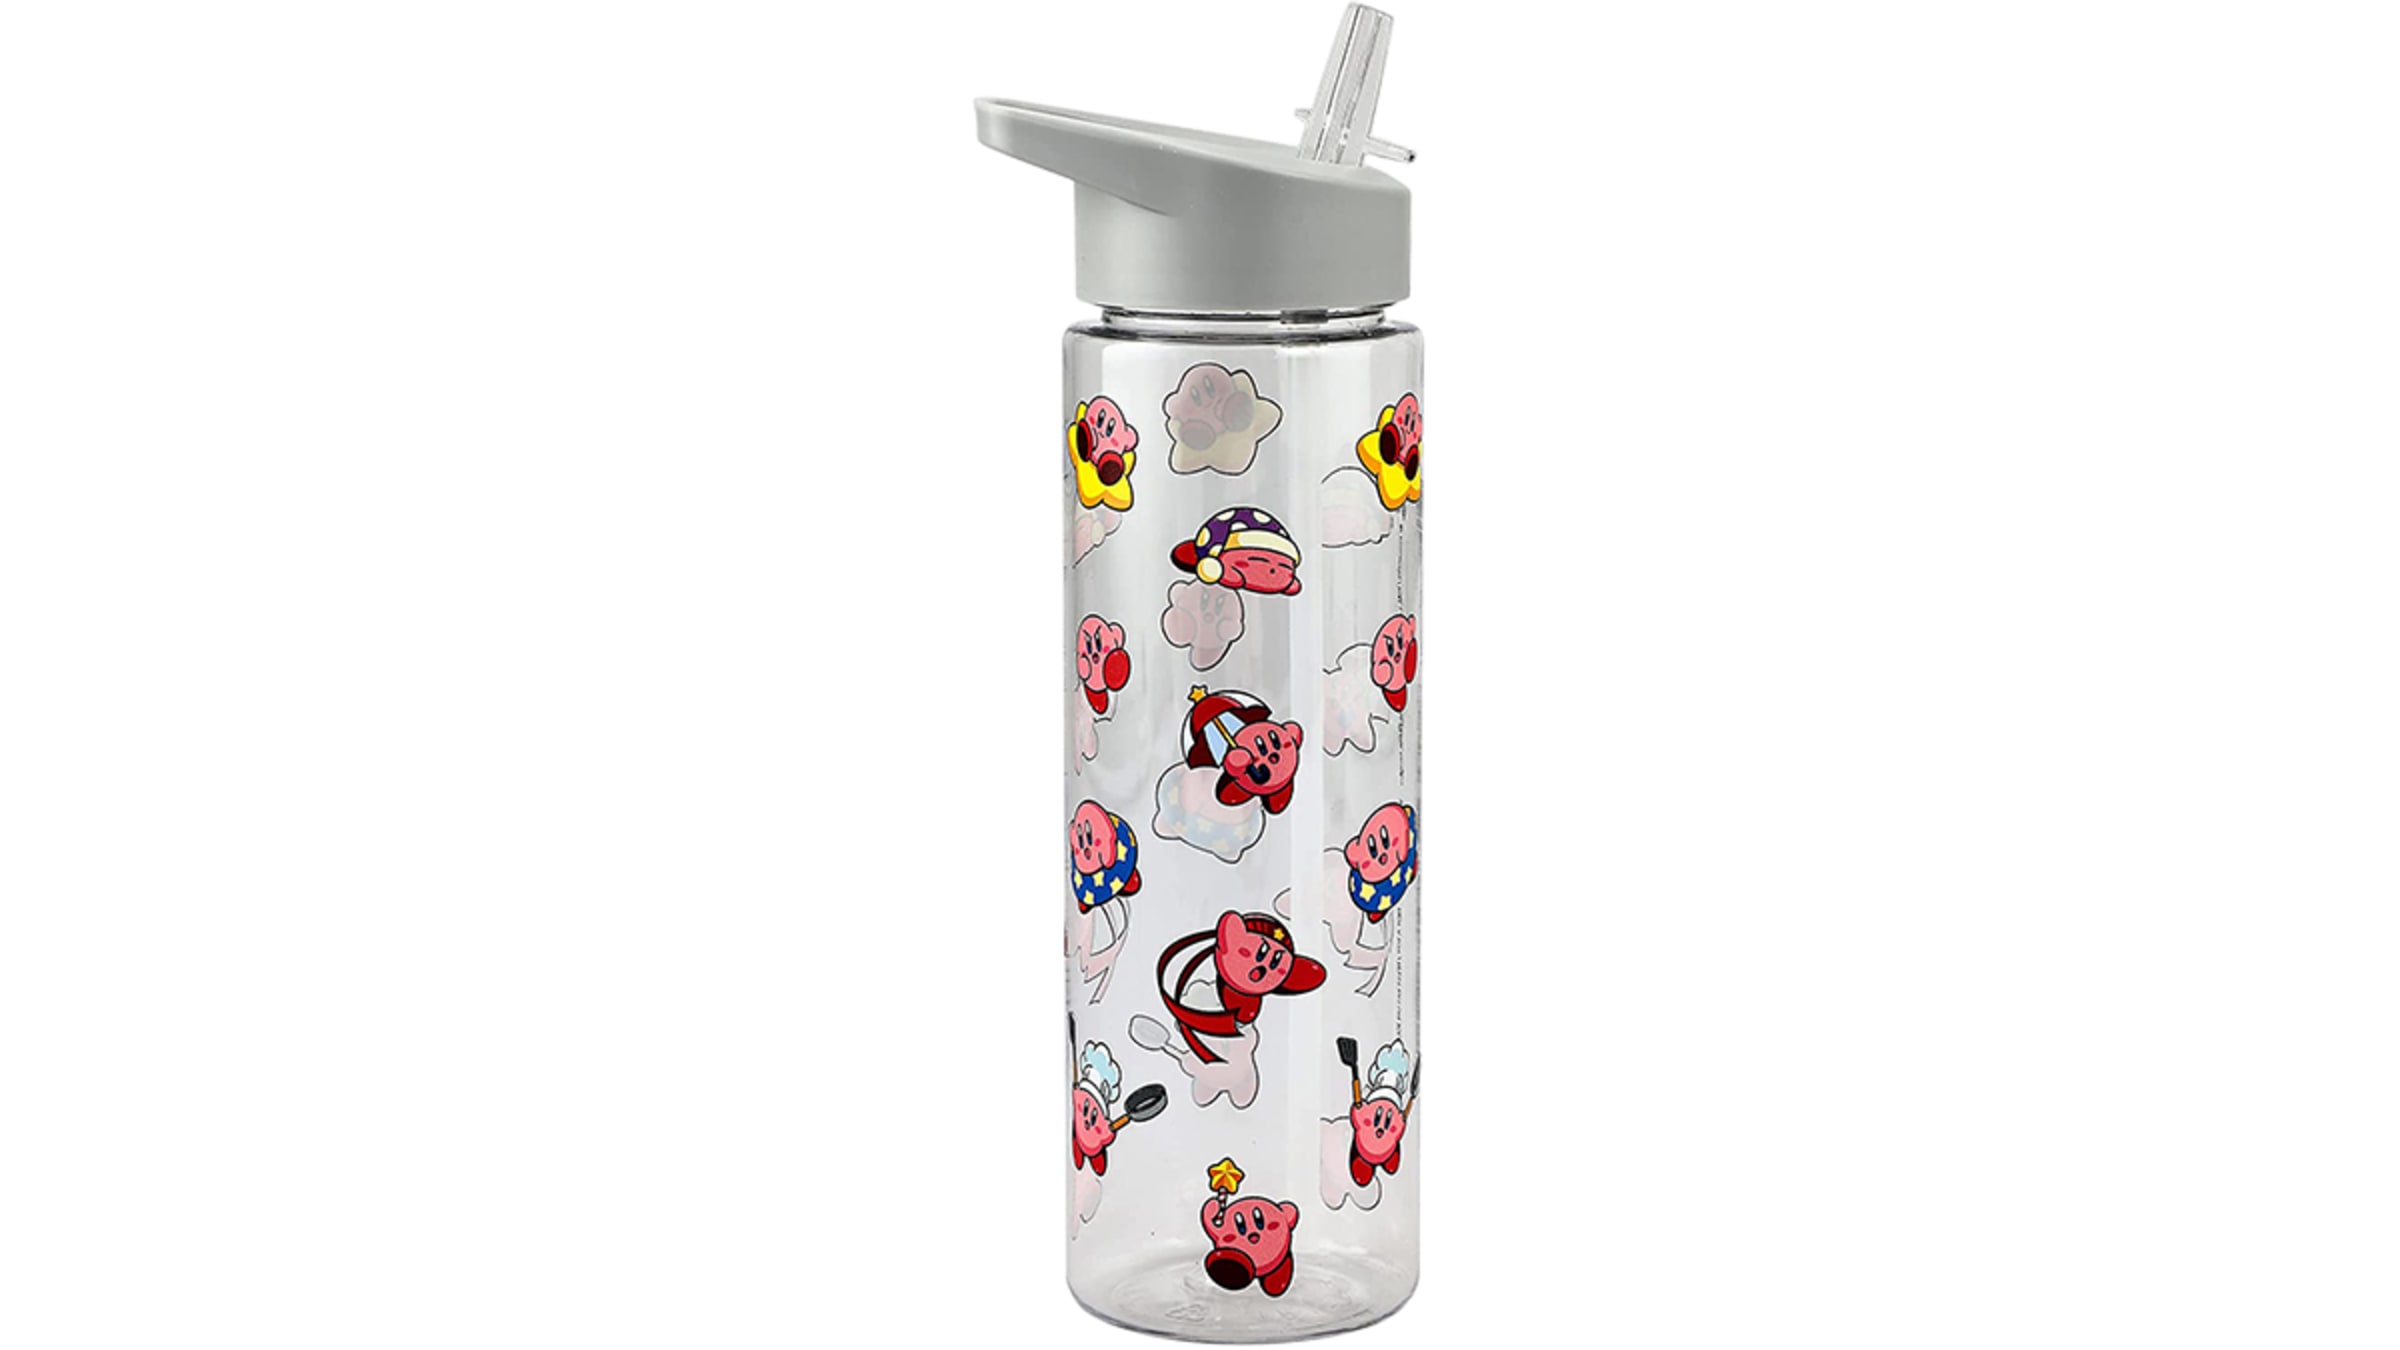 https://assets.nintendo.com/image/upload/c_fill,w_1200/q_auto:best/f_auto/dpr_2.0/ncom/en_US/products/merchandise/home%20and%20office/drinkware/kirby-single-wall-tritan-water-bottle-24-oz-117152/117152-bioworld-kirby-water-bottle-view-4-1200x675